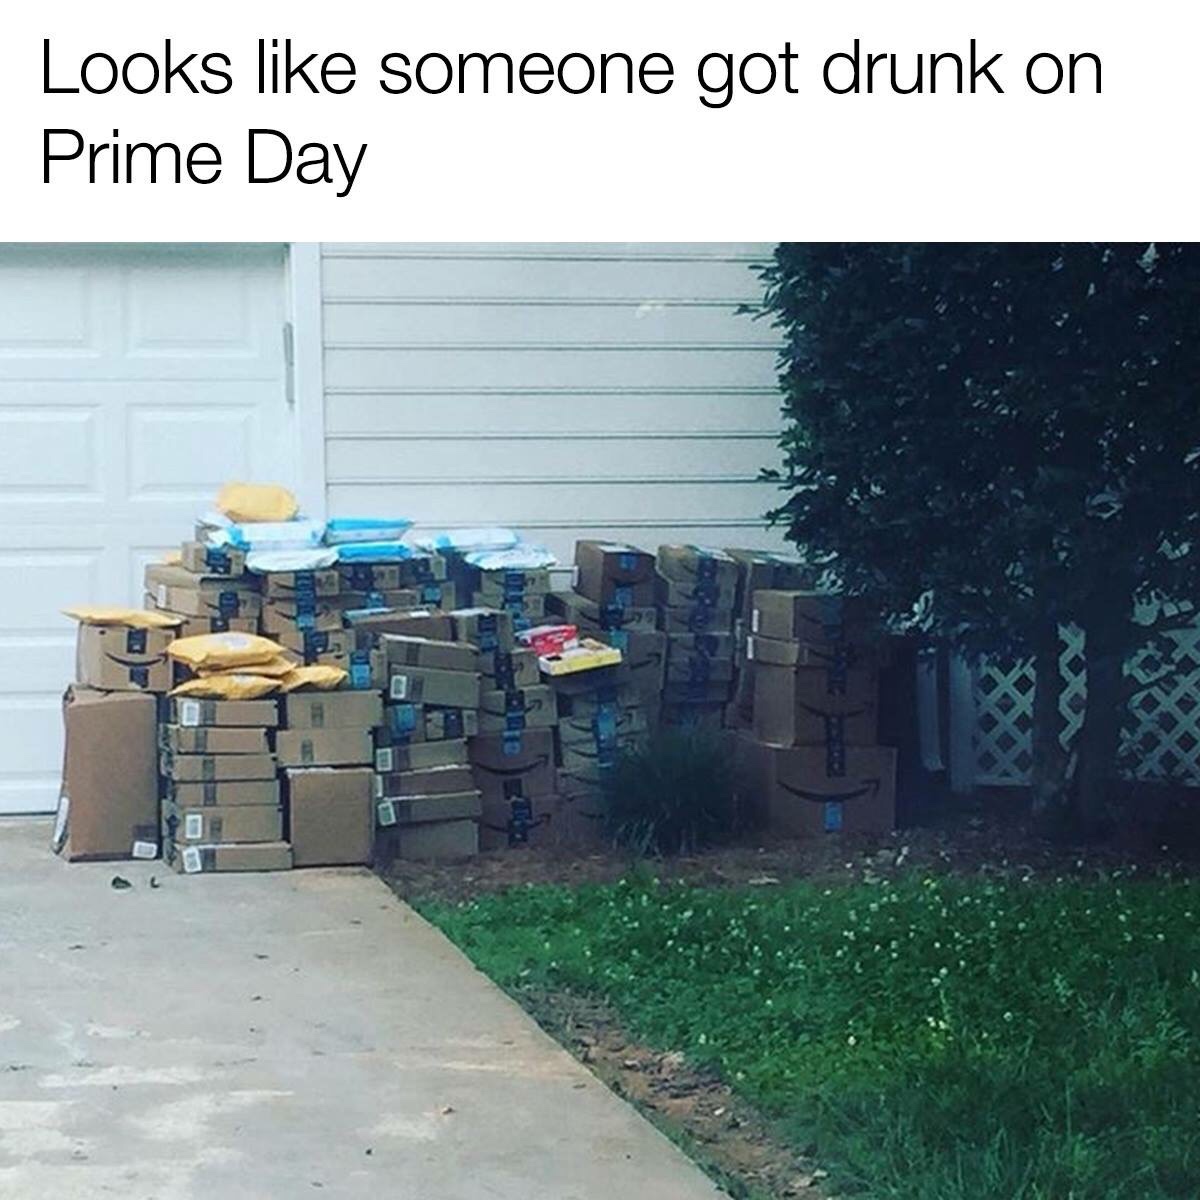 drunk and amazon prime - Looks someone got drunk on Prime Day Co